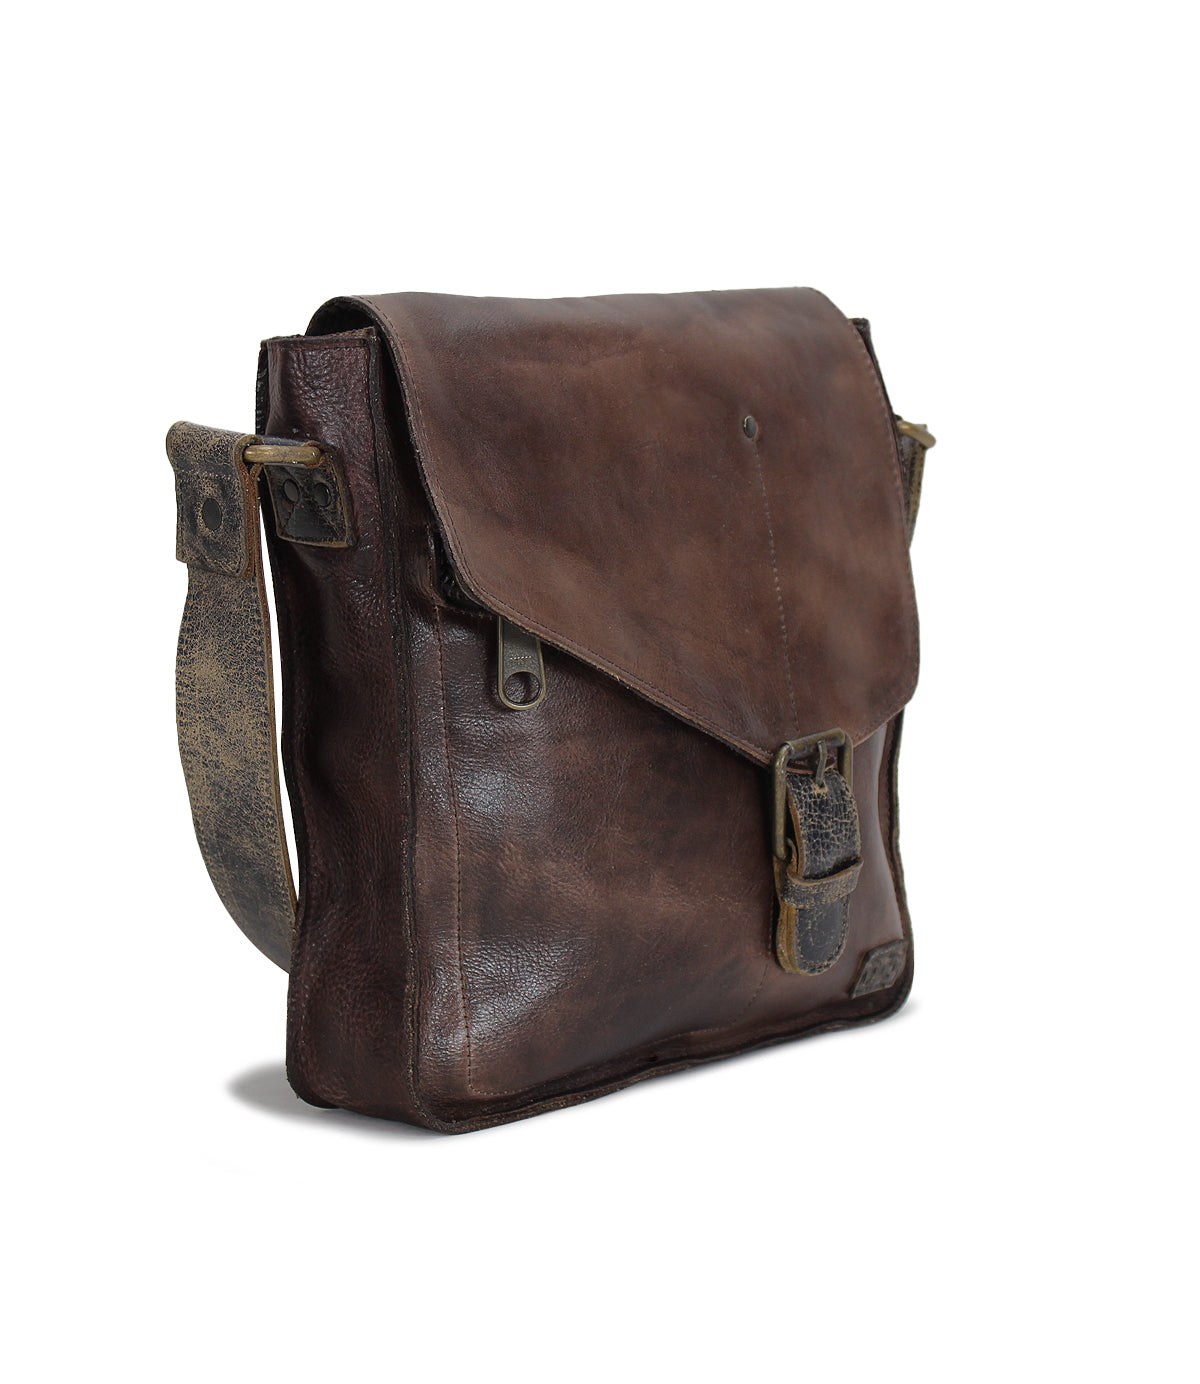 A teak Venice Beach vegetable tanned leather bag with an adjustable strap by Bed Stu.